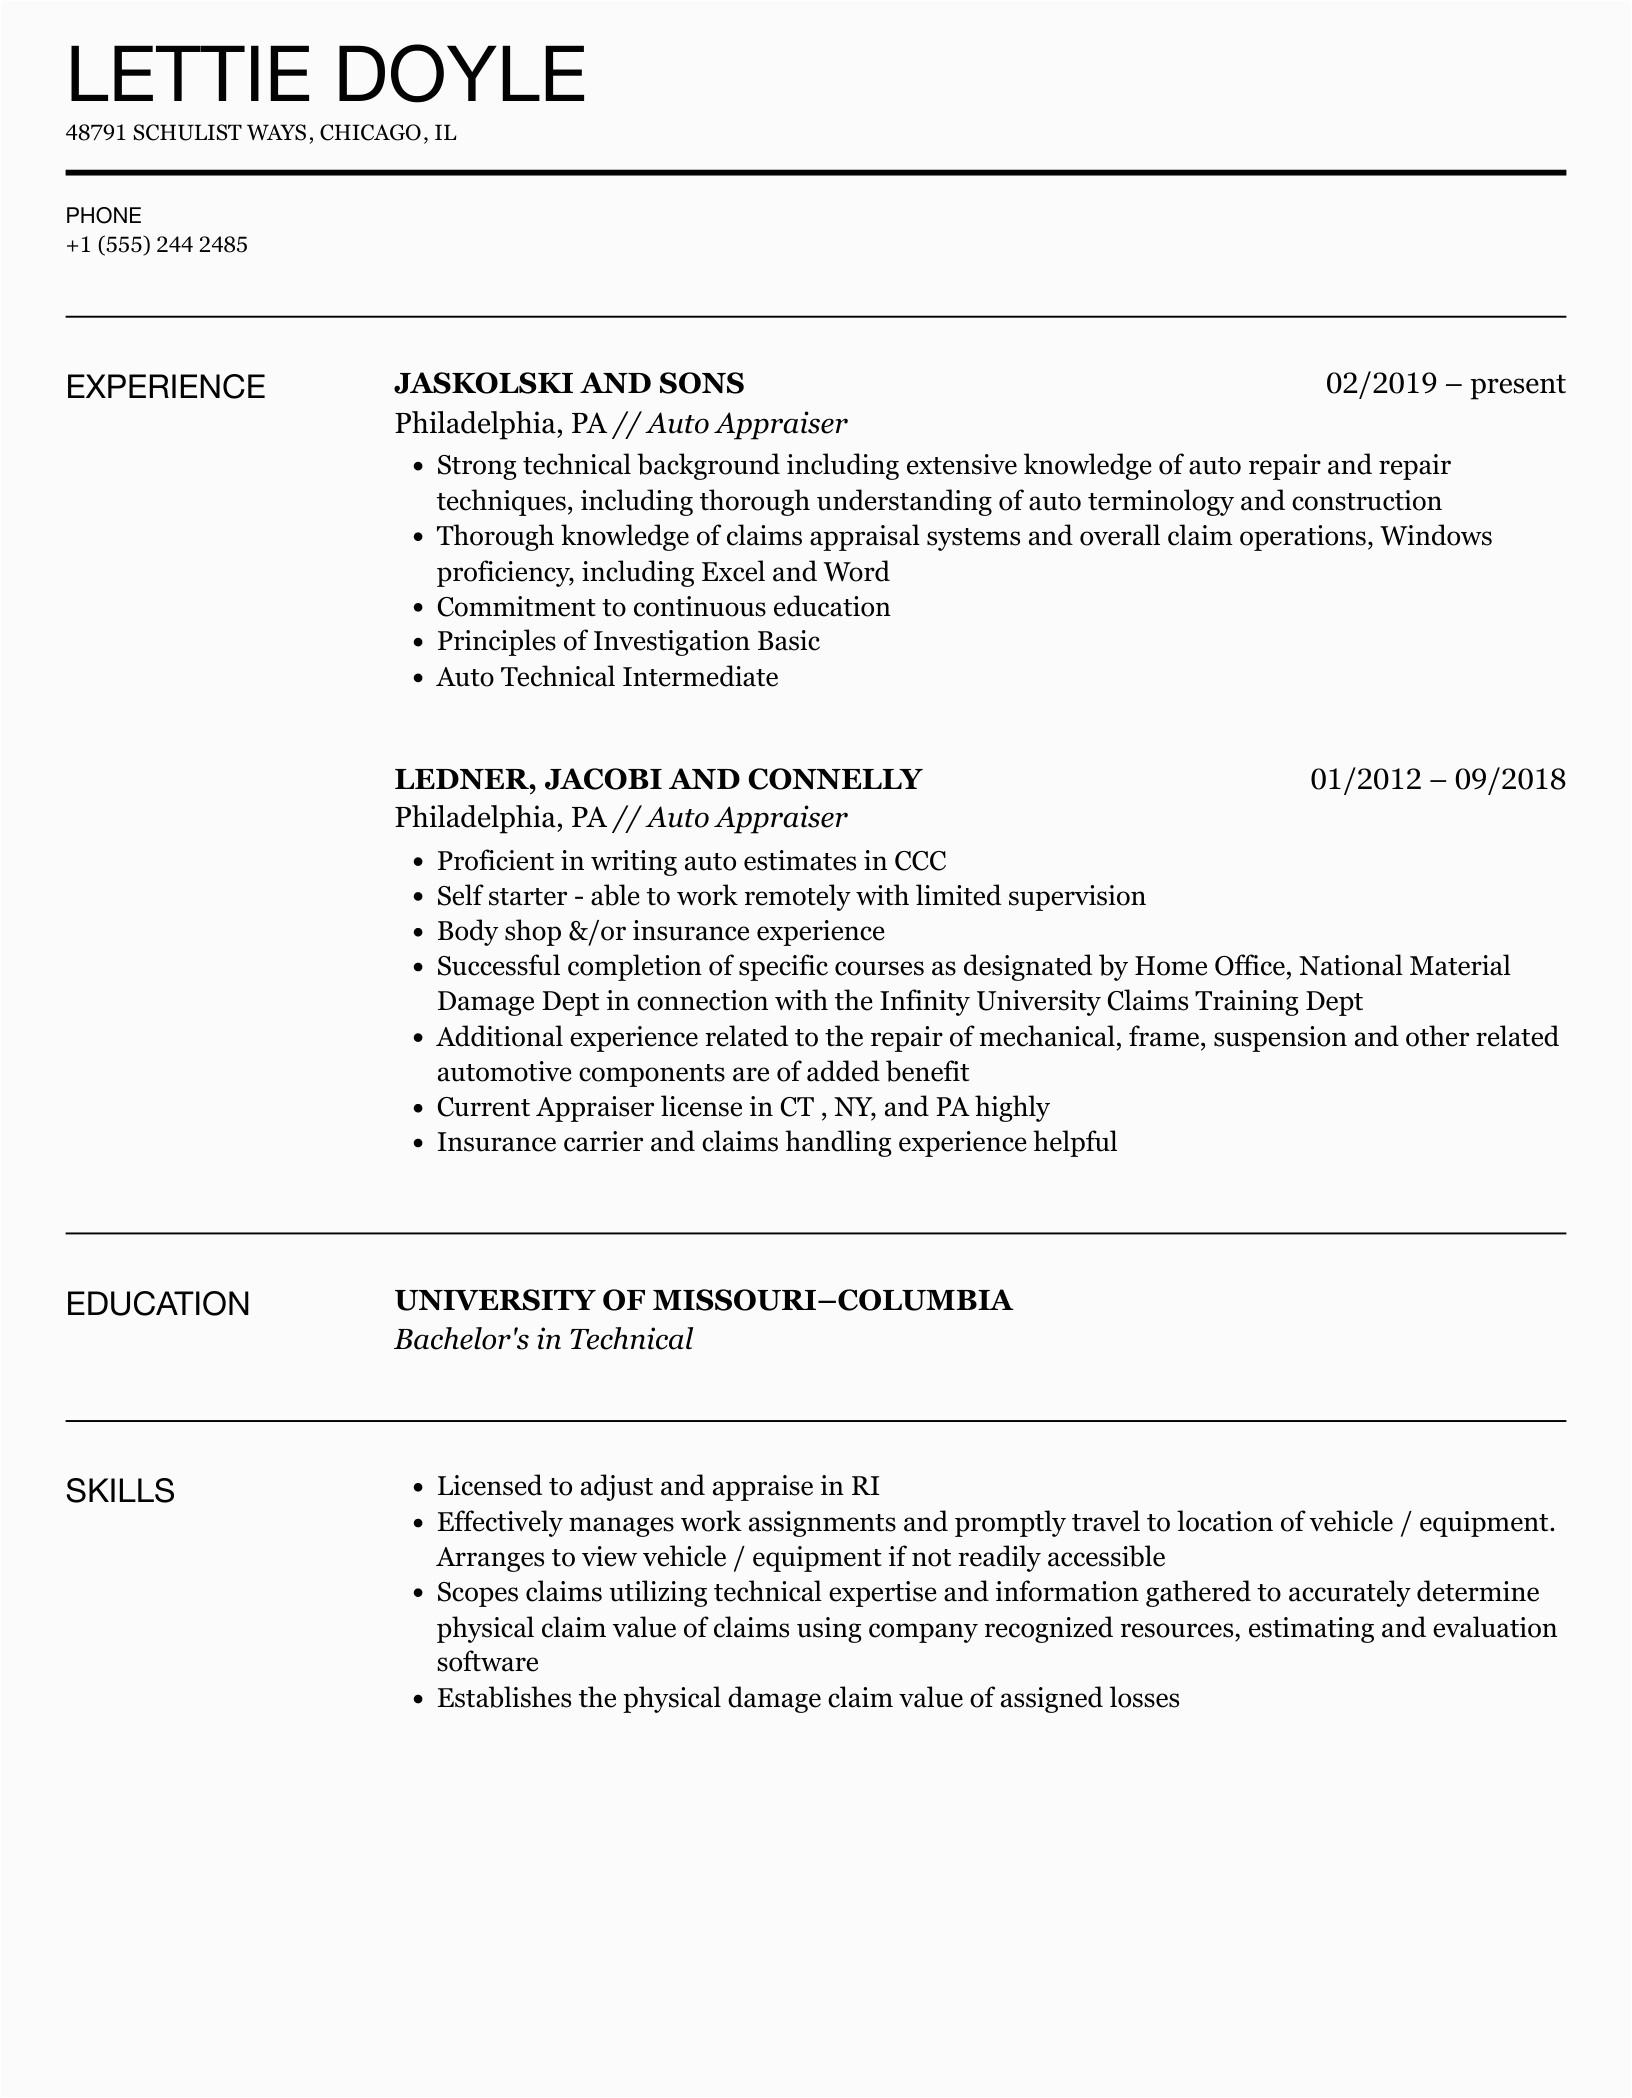 Sample Resume for Auto Claims Auditor Appraiser Estimator Auto Appraiser Resume Samples